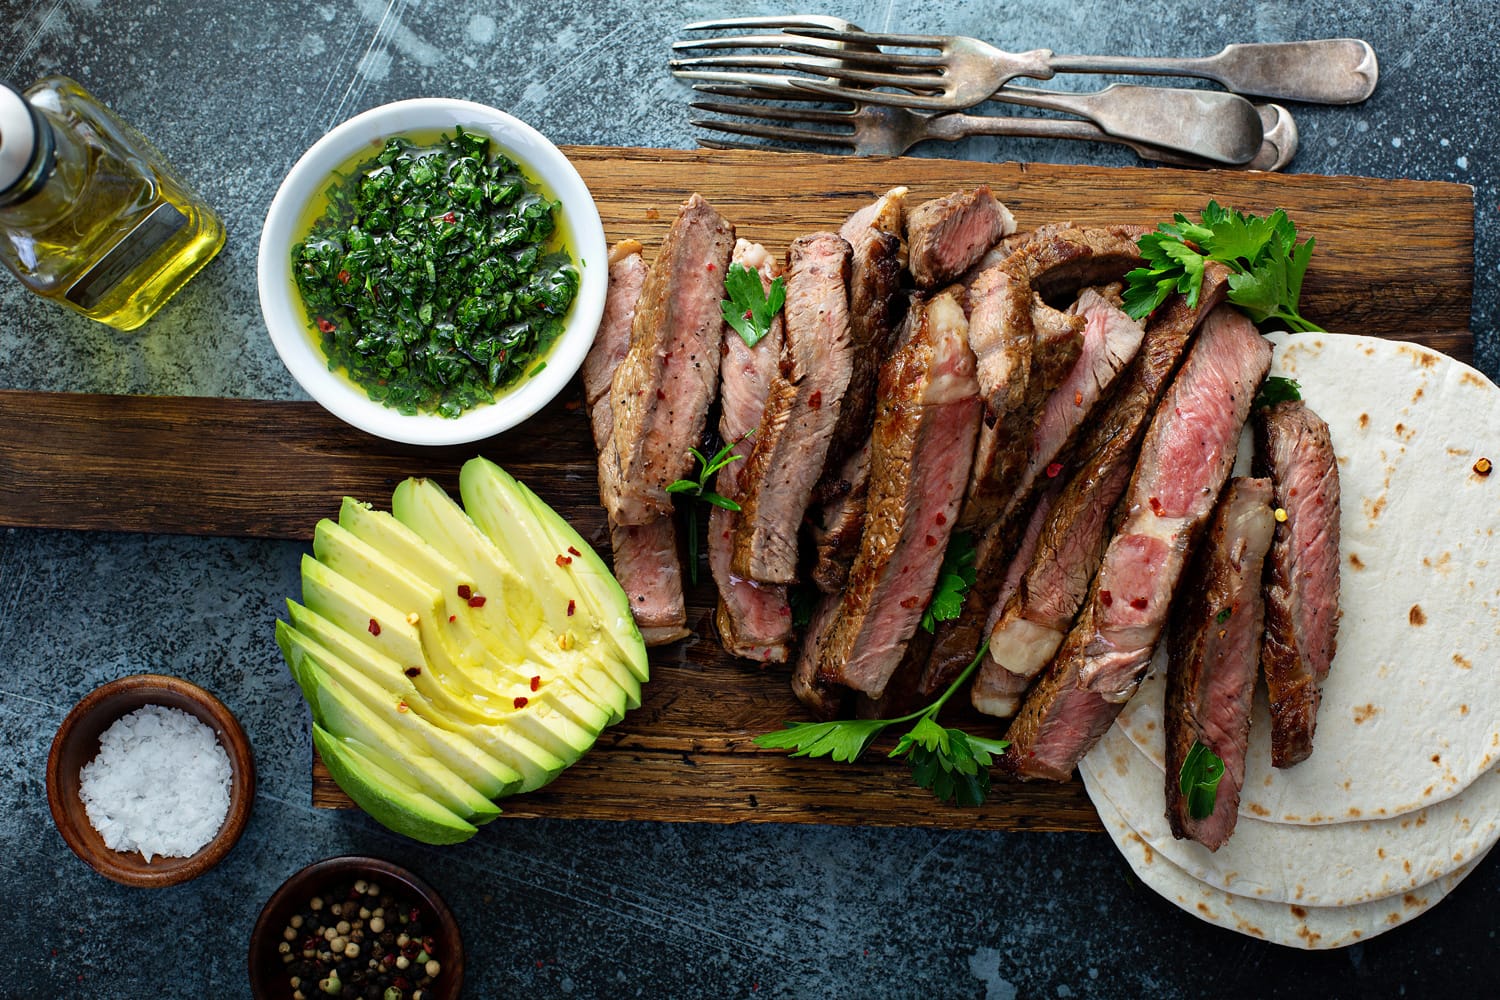 Mexican steak with avocado, tortillas and green sauce